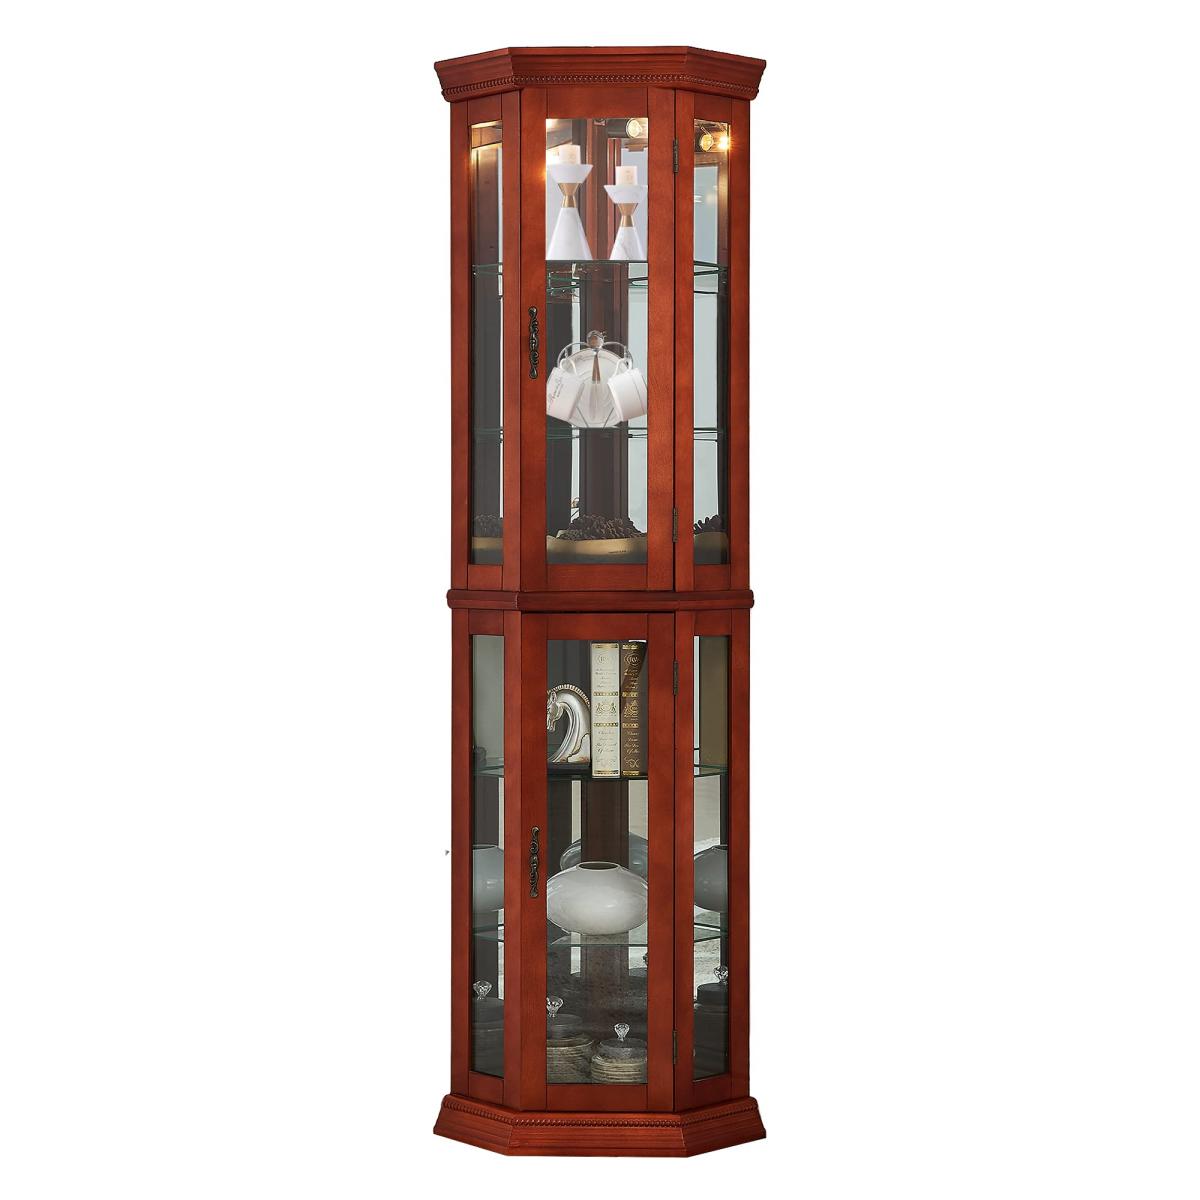 Corner Curio Cabinet with Lights, Adjustable Tempered Glass Shelves, Mirrored Back, Display Cabinet,Walnut (e26 light bulb not included)